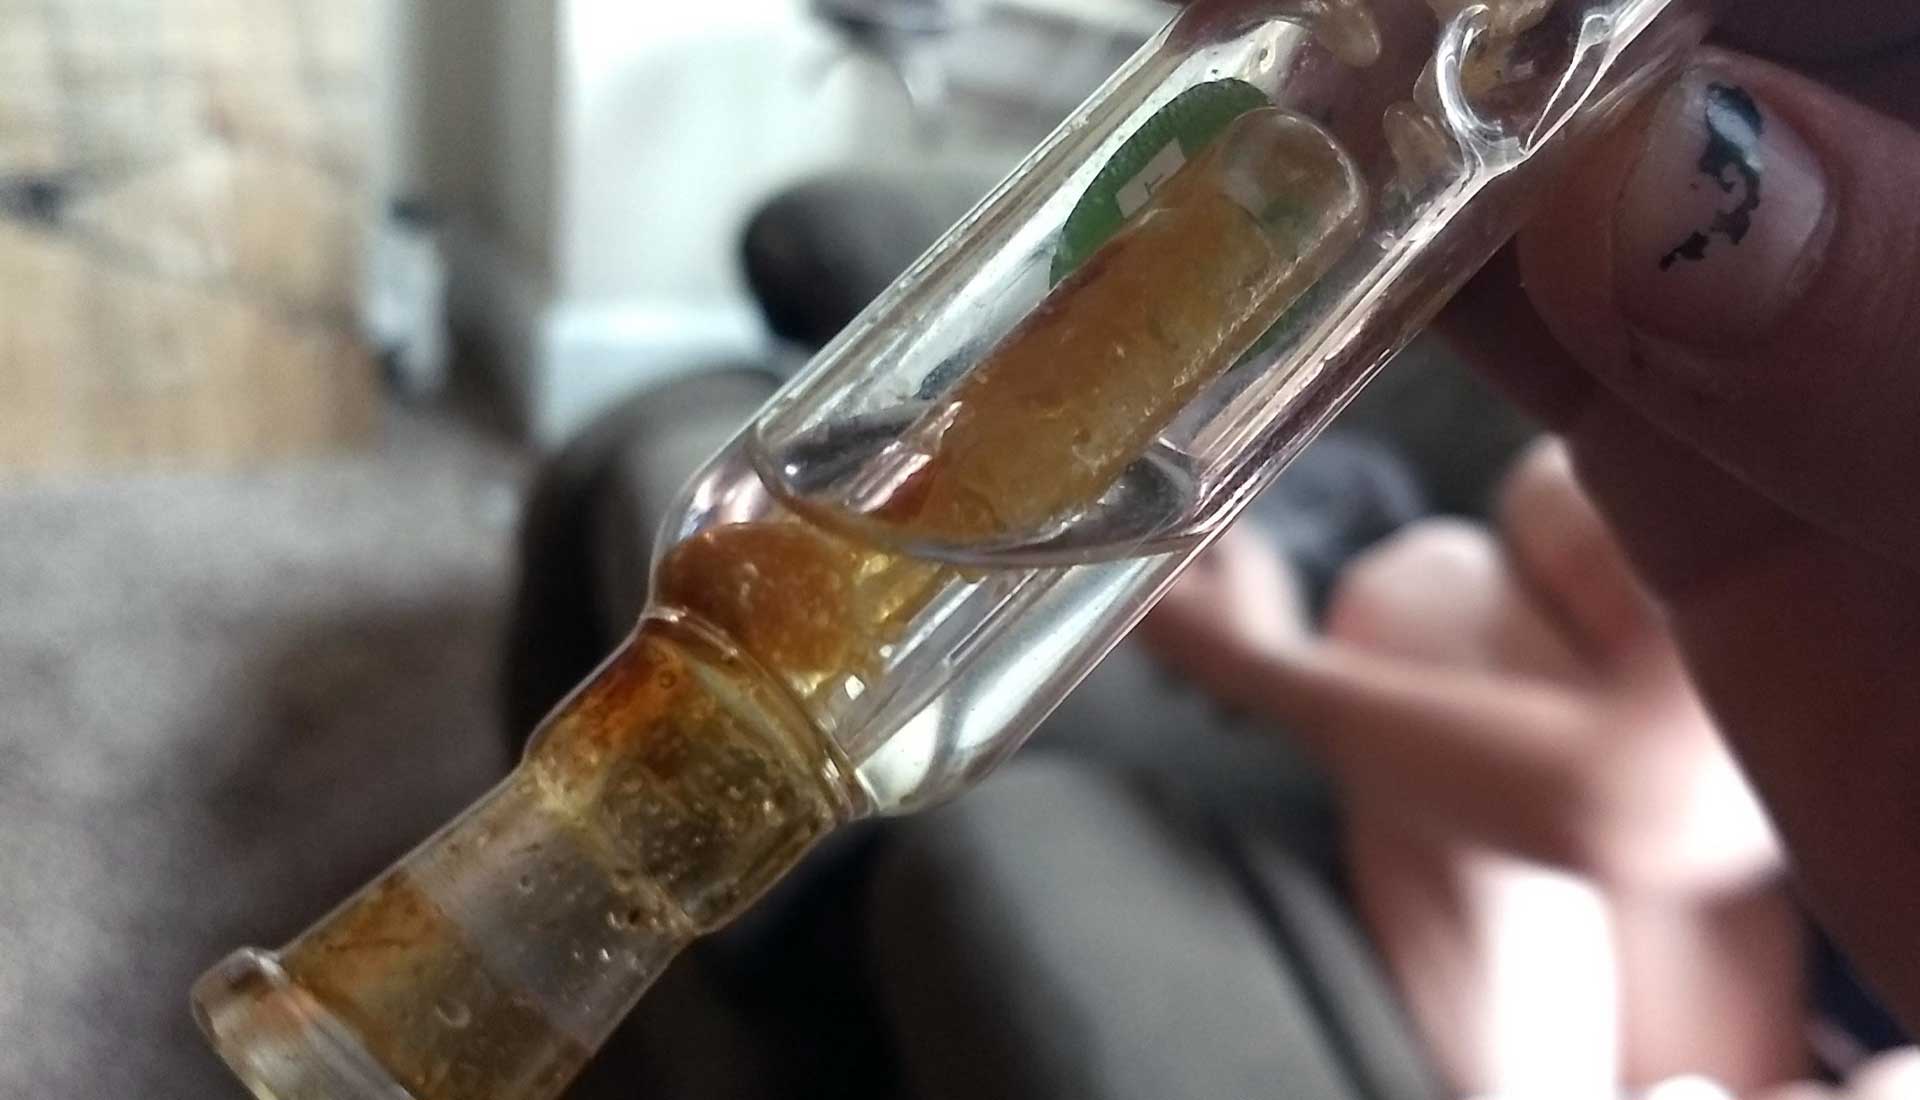 How to Clean a Nectar Collector In 7 Simple Steps